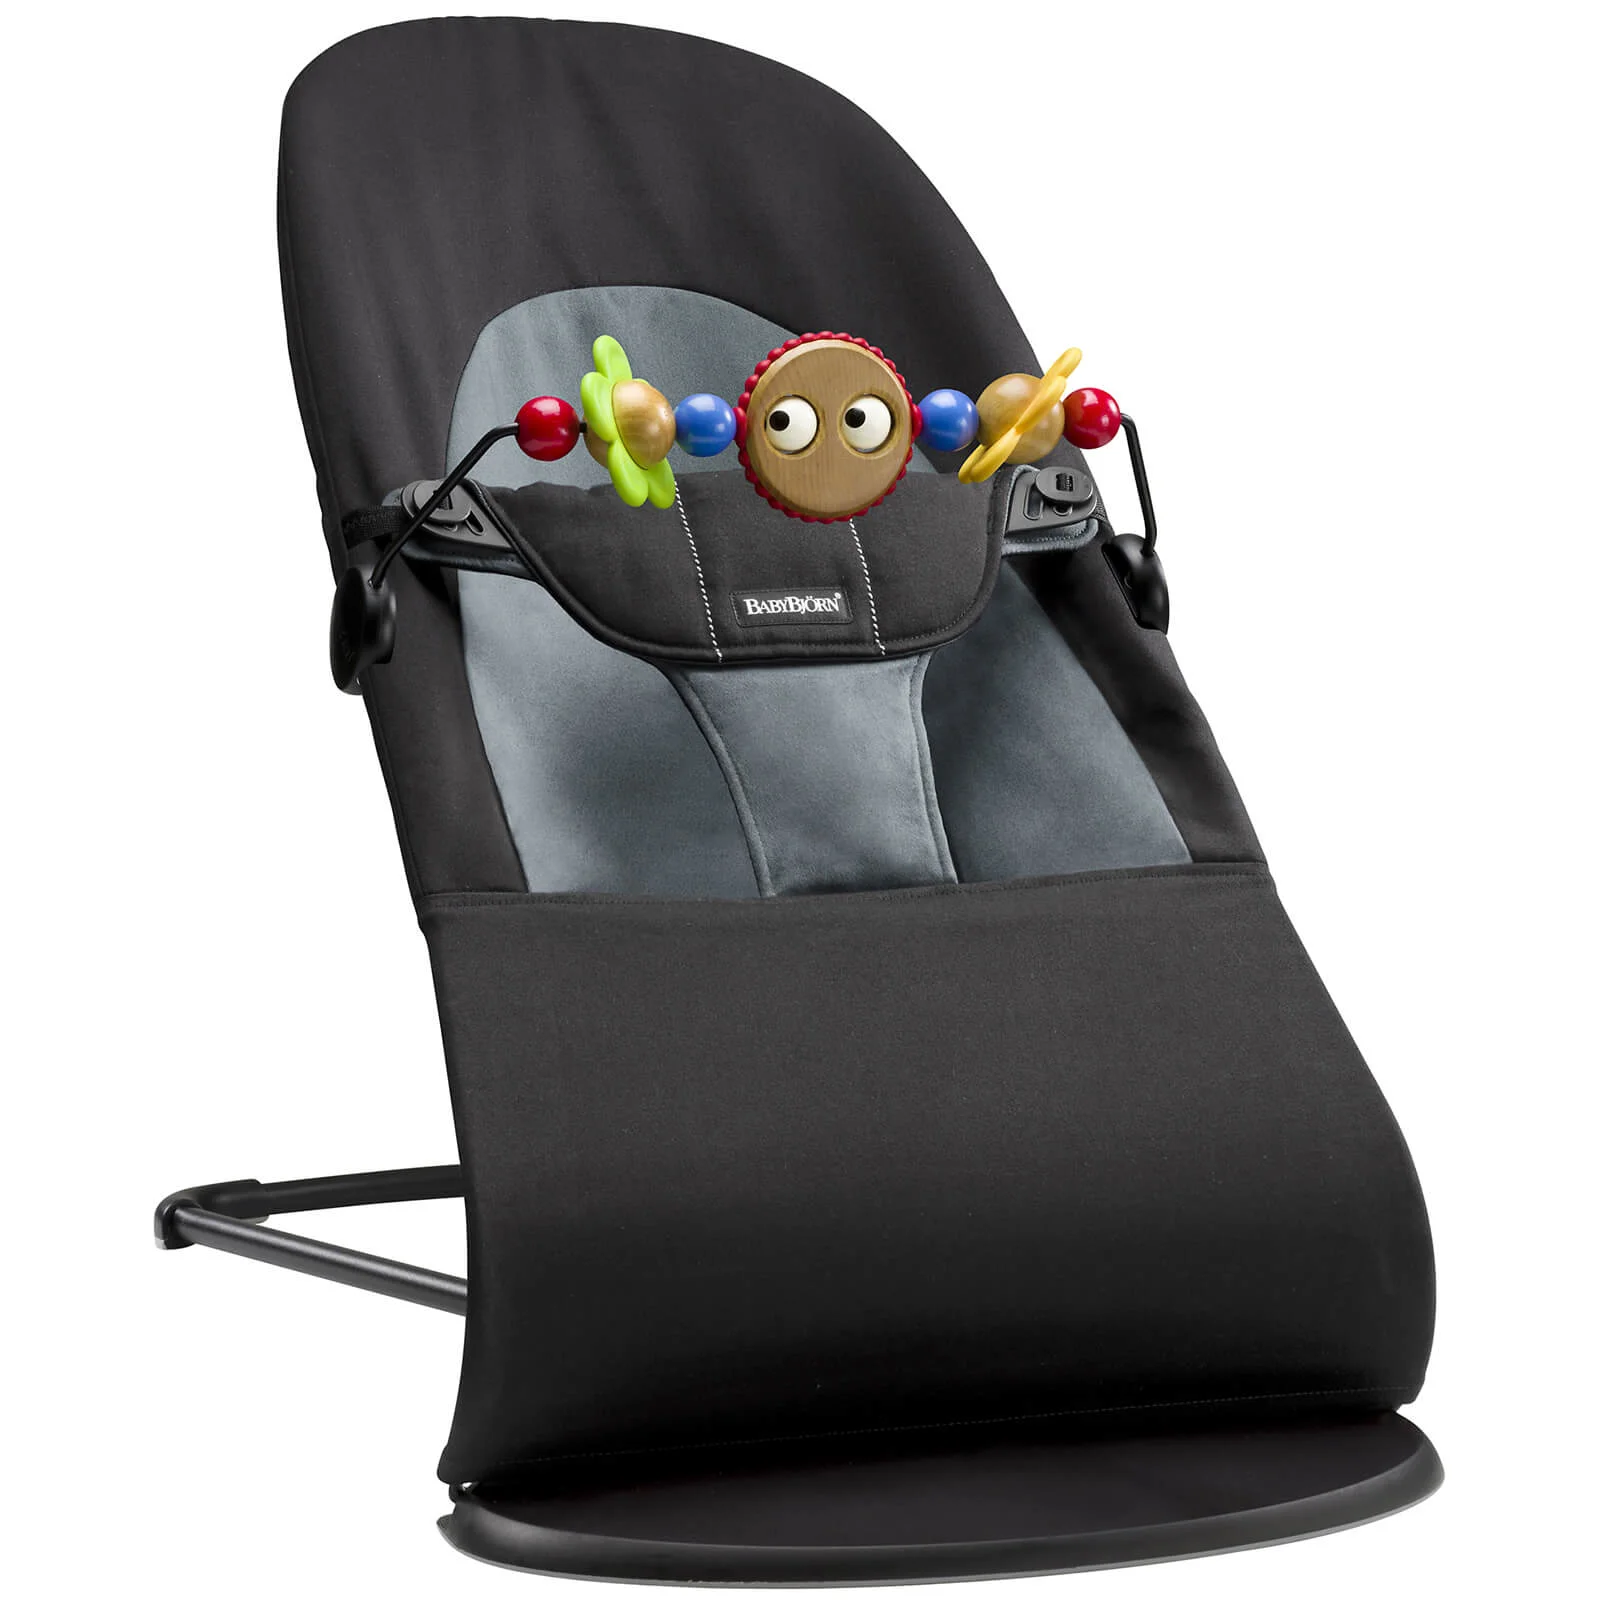 BABYBJÖRN Bouncer Soft and Googly Eyes Bouncer Toy - Black and Grey Image 1